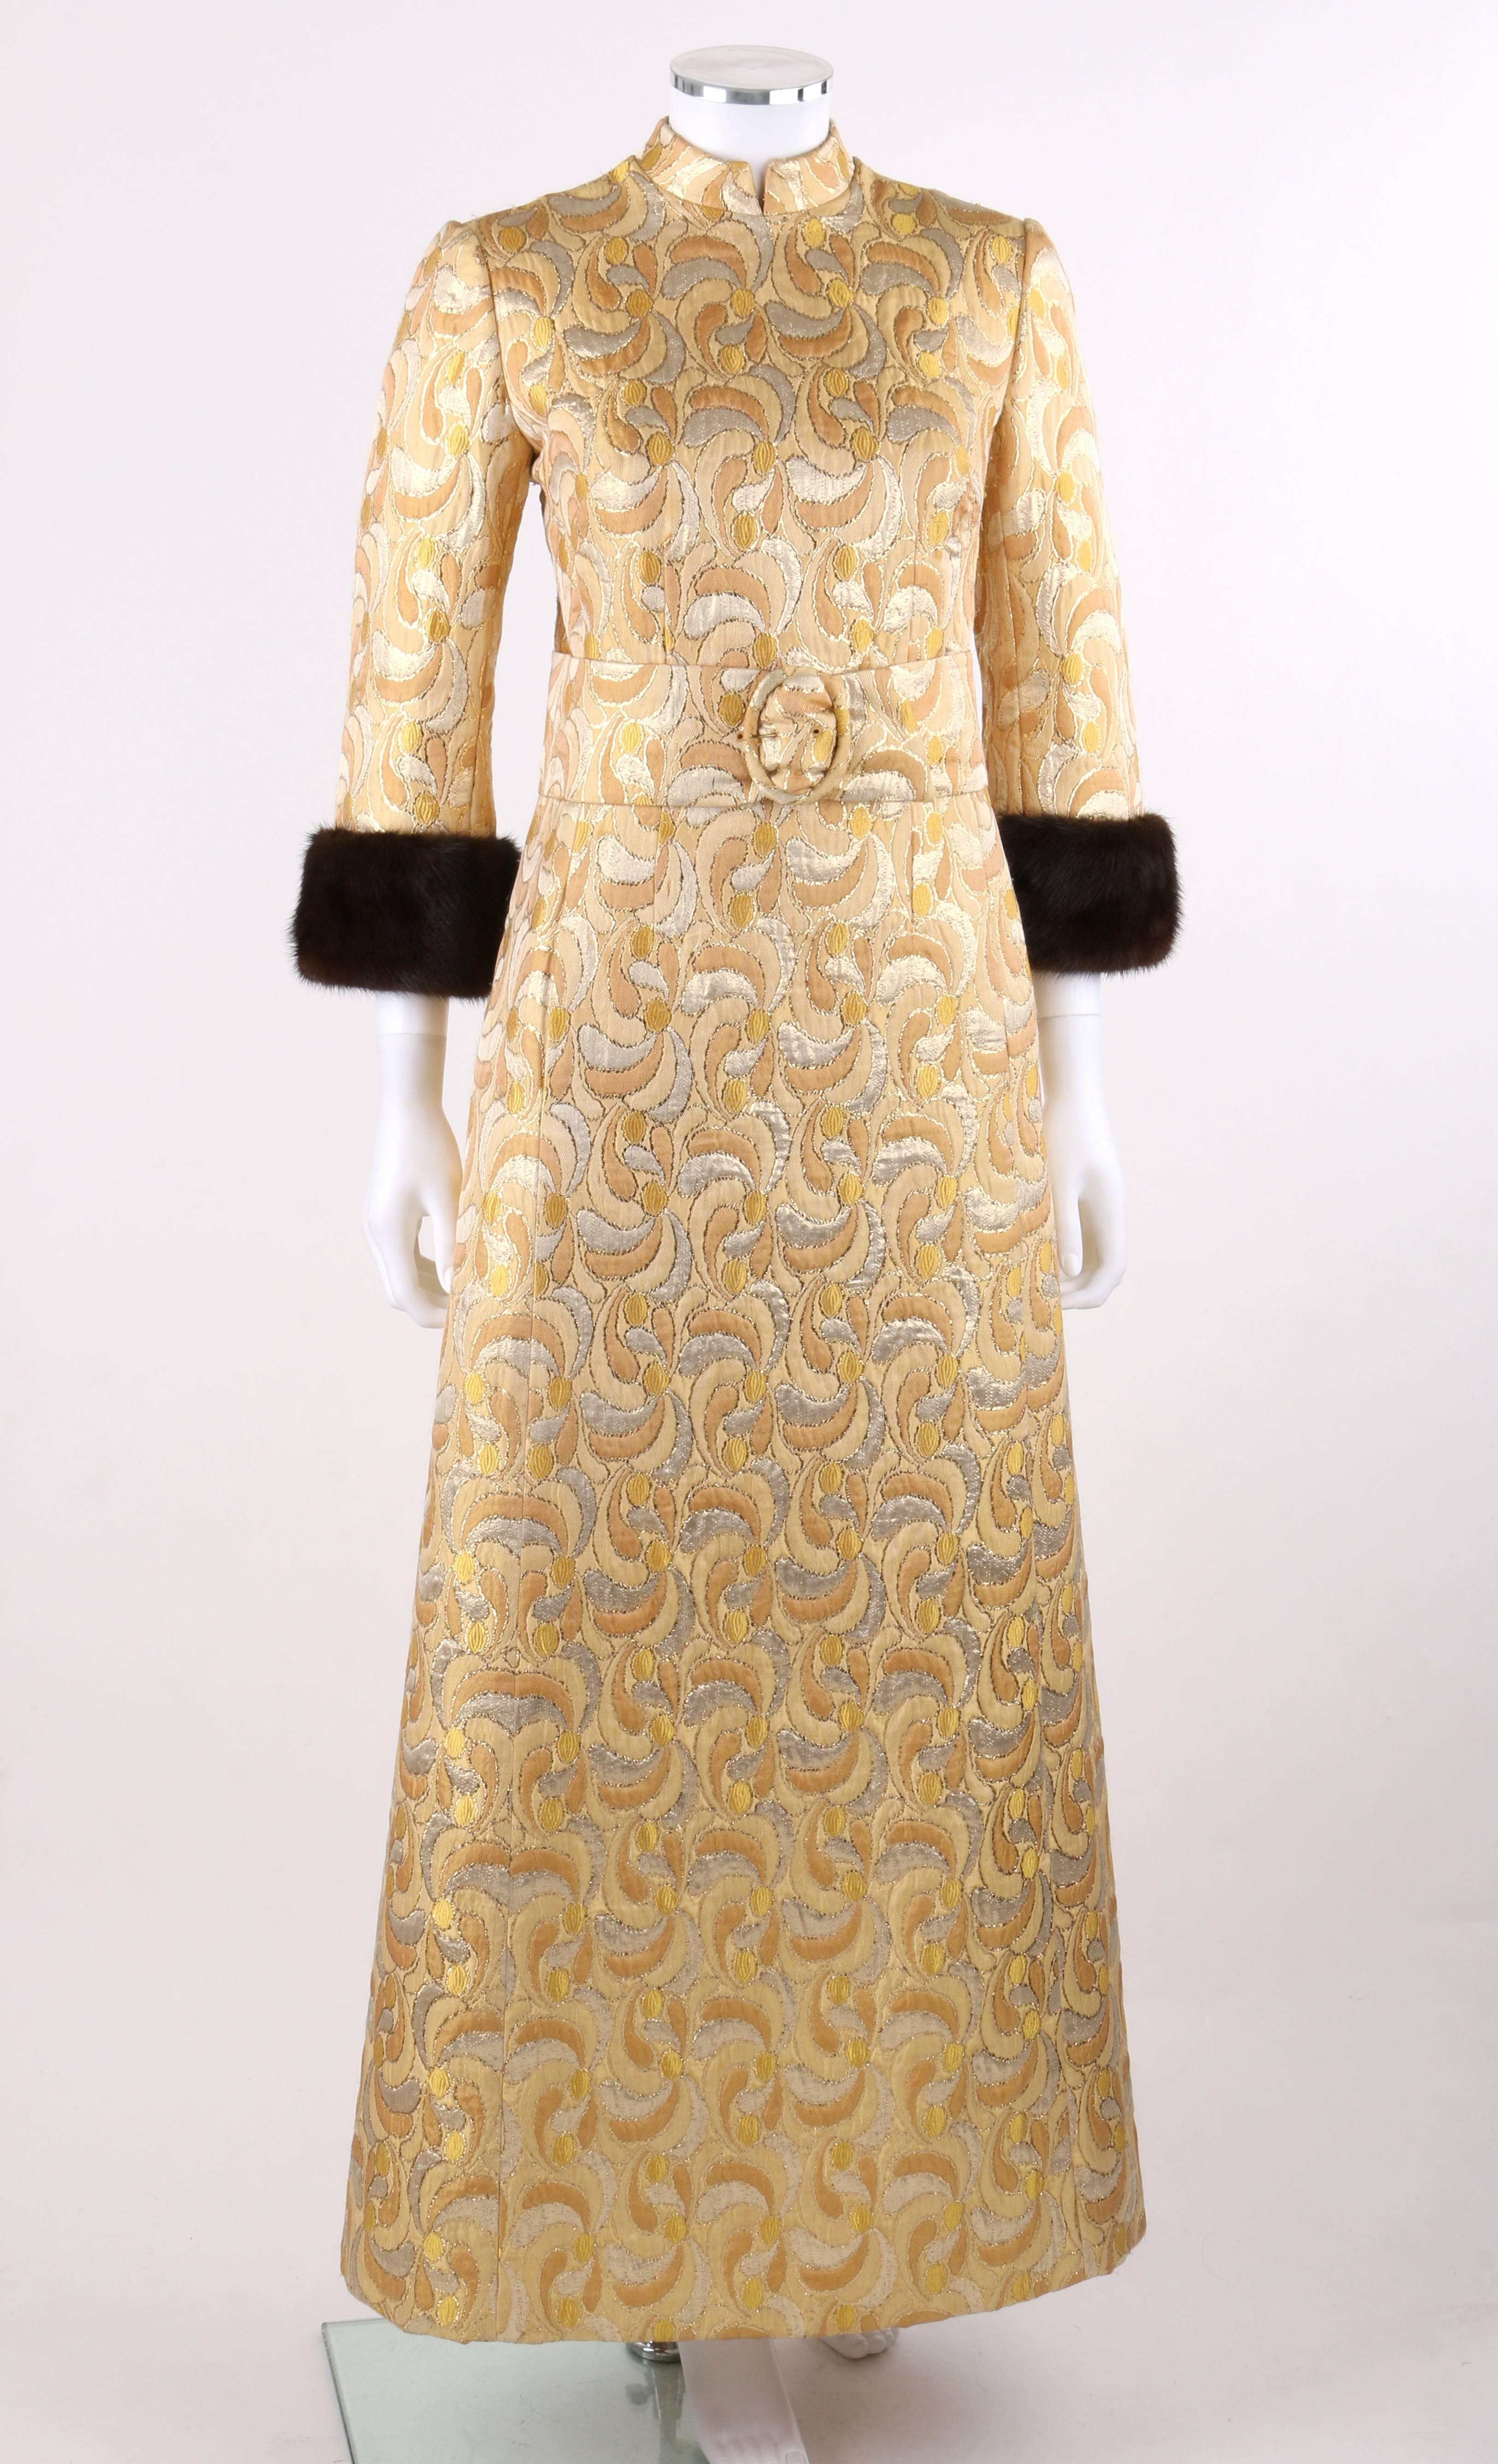 Vintage Lillie Rubin c.1960's metallic brocade brown mink fur cuff belted caftan evening dress. Metallic floral patterned brocade with shades of gold, silver, and beige. Mandarin collar with slit at center front. 3/4 sleeves with brown mink fur